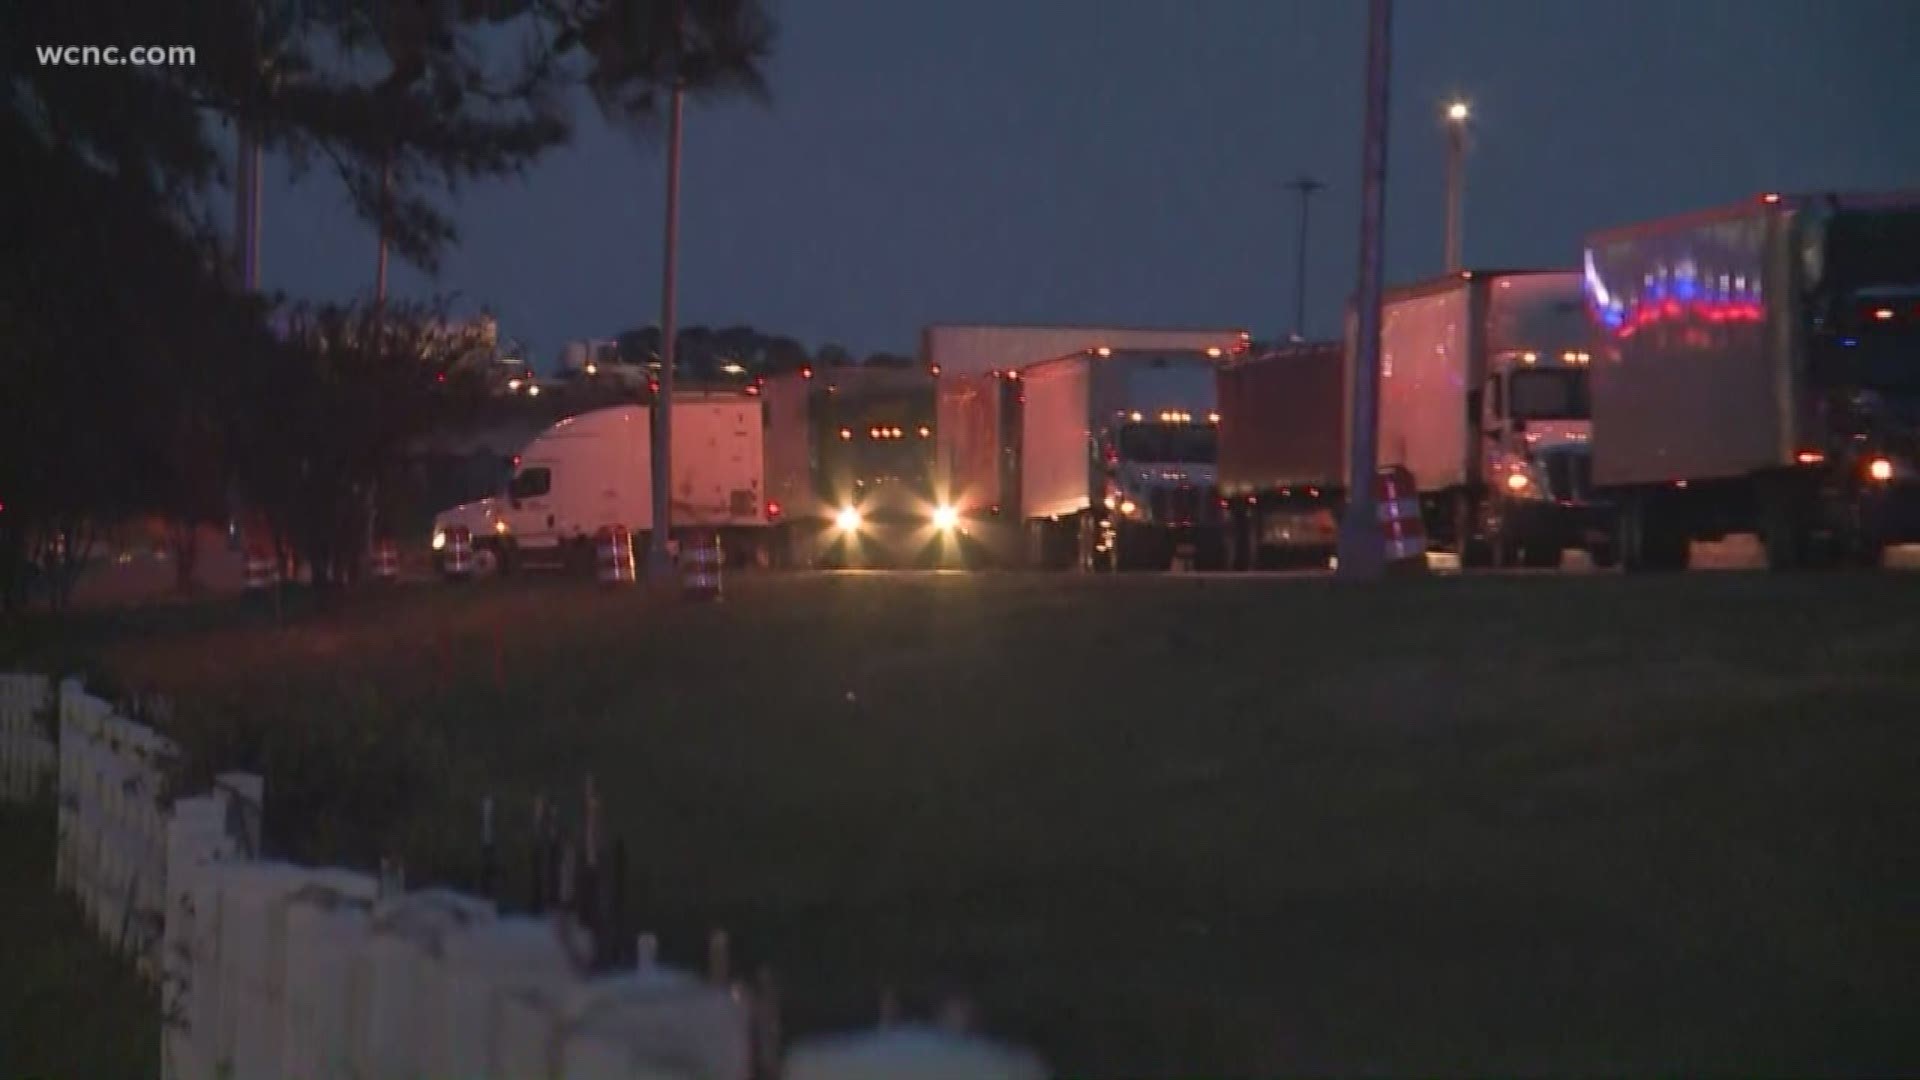 Traffic was backed up for miles on I-77 after a tractor-trailer went up in flames early Wednesday morning.